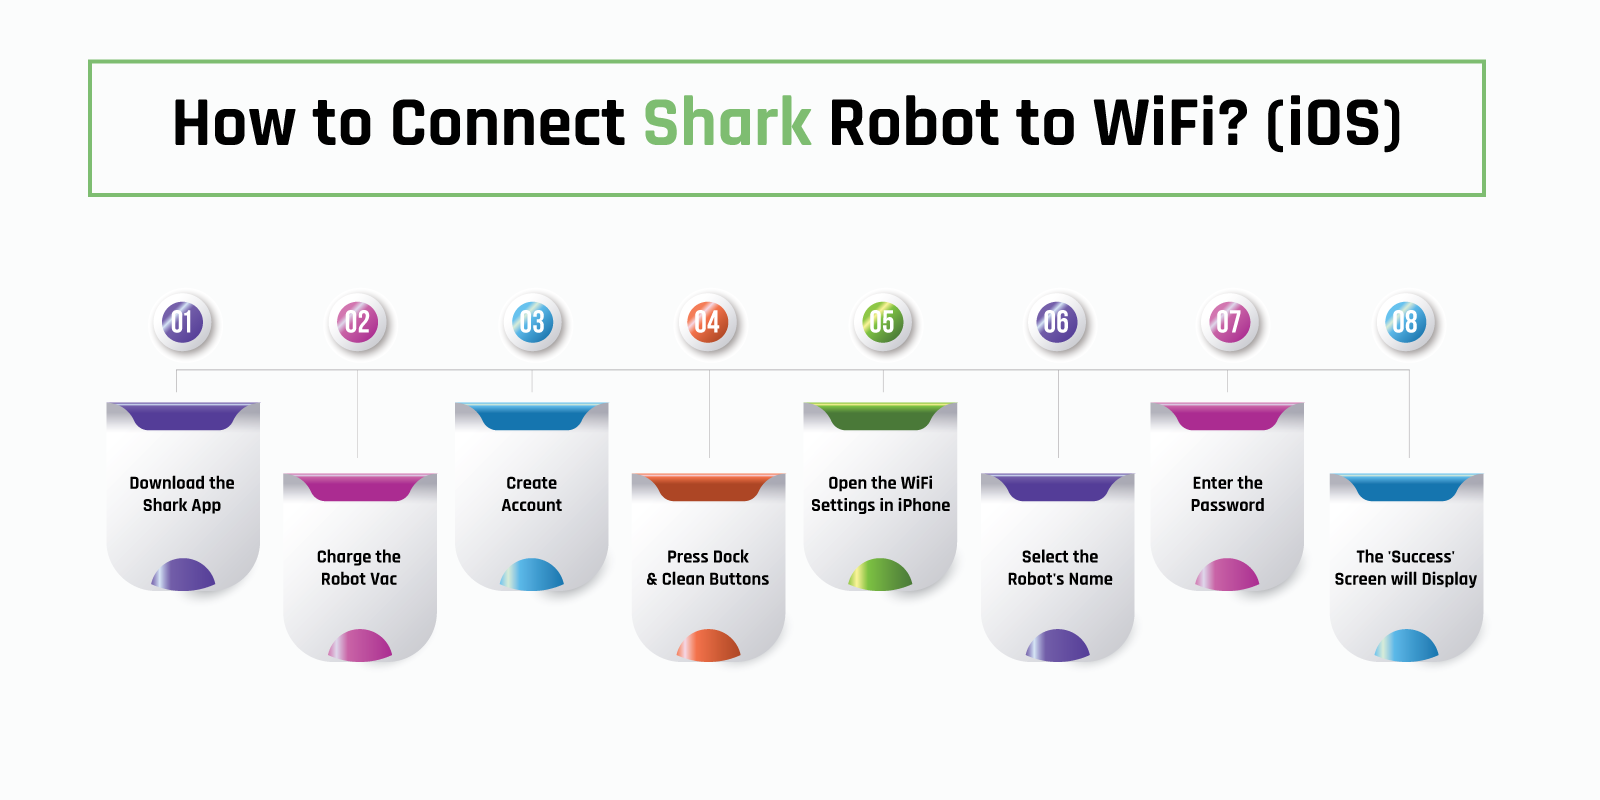 How-to-Connect-Shark-Robot-to-WiFi-(iOS)